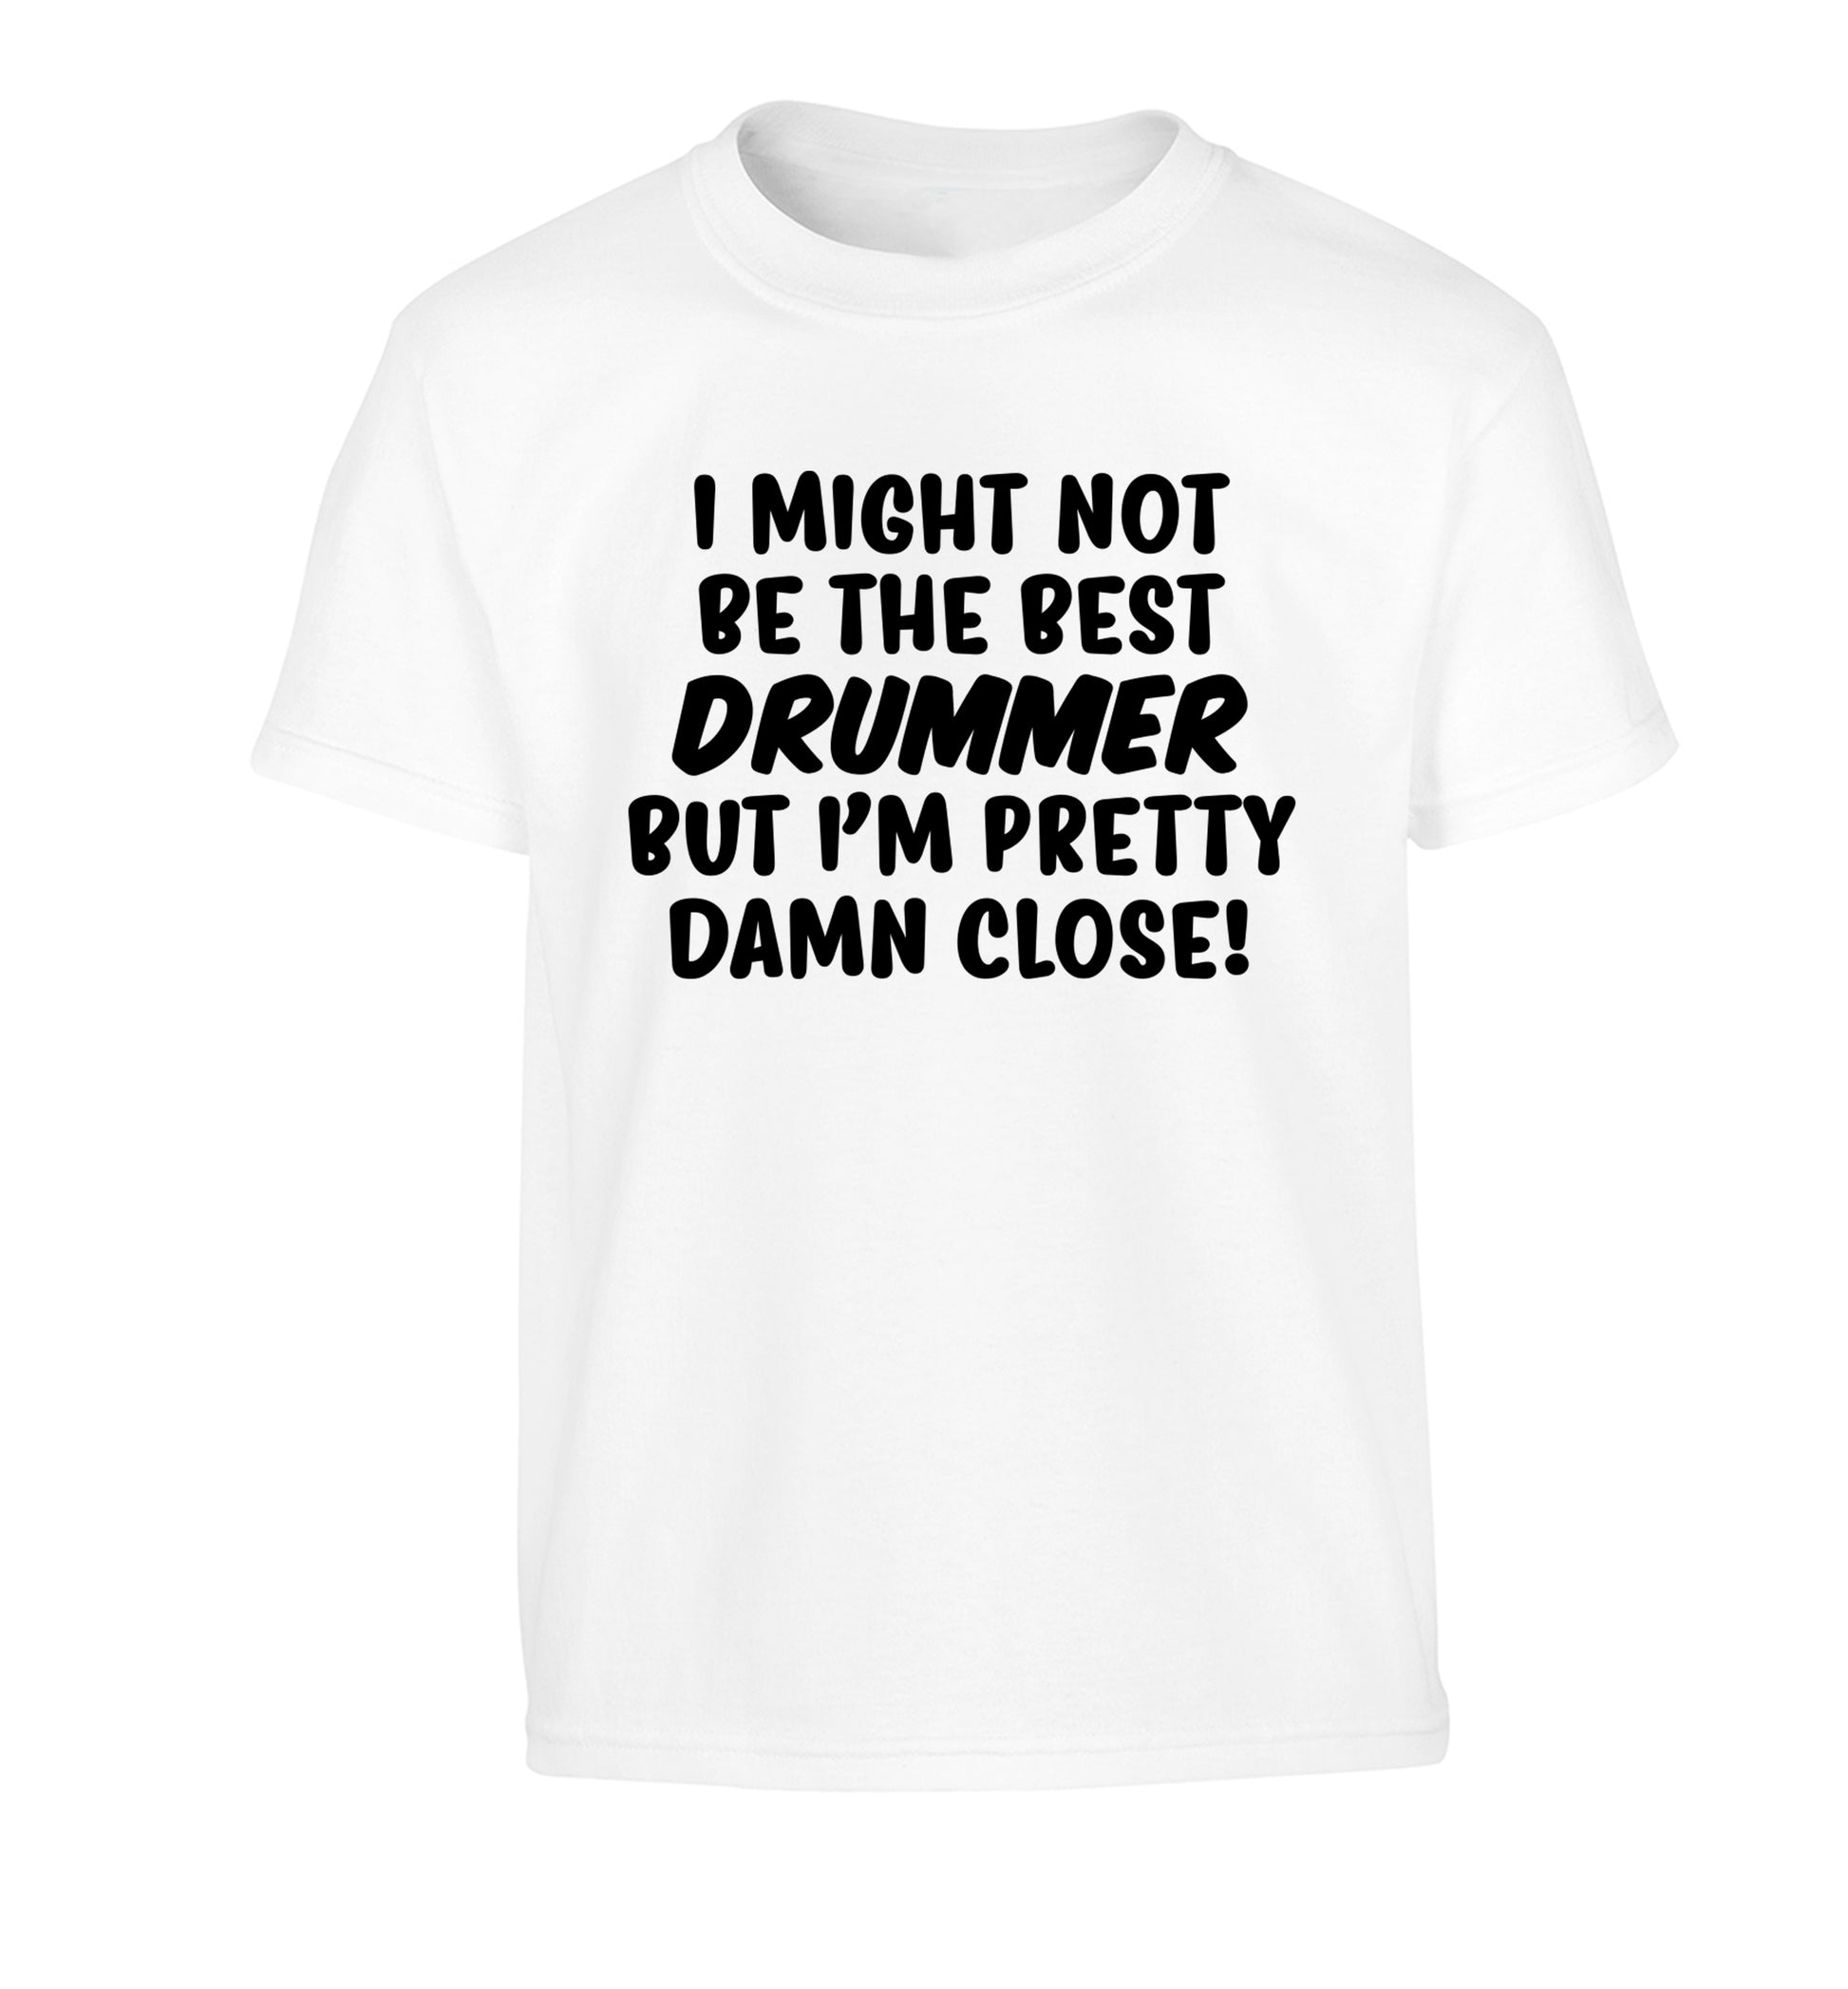 I might not be the best drummer but I'm pretty close! Children's white Tshirt 12-14 Years